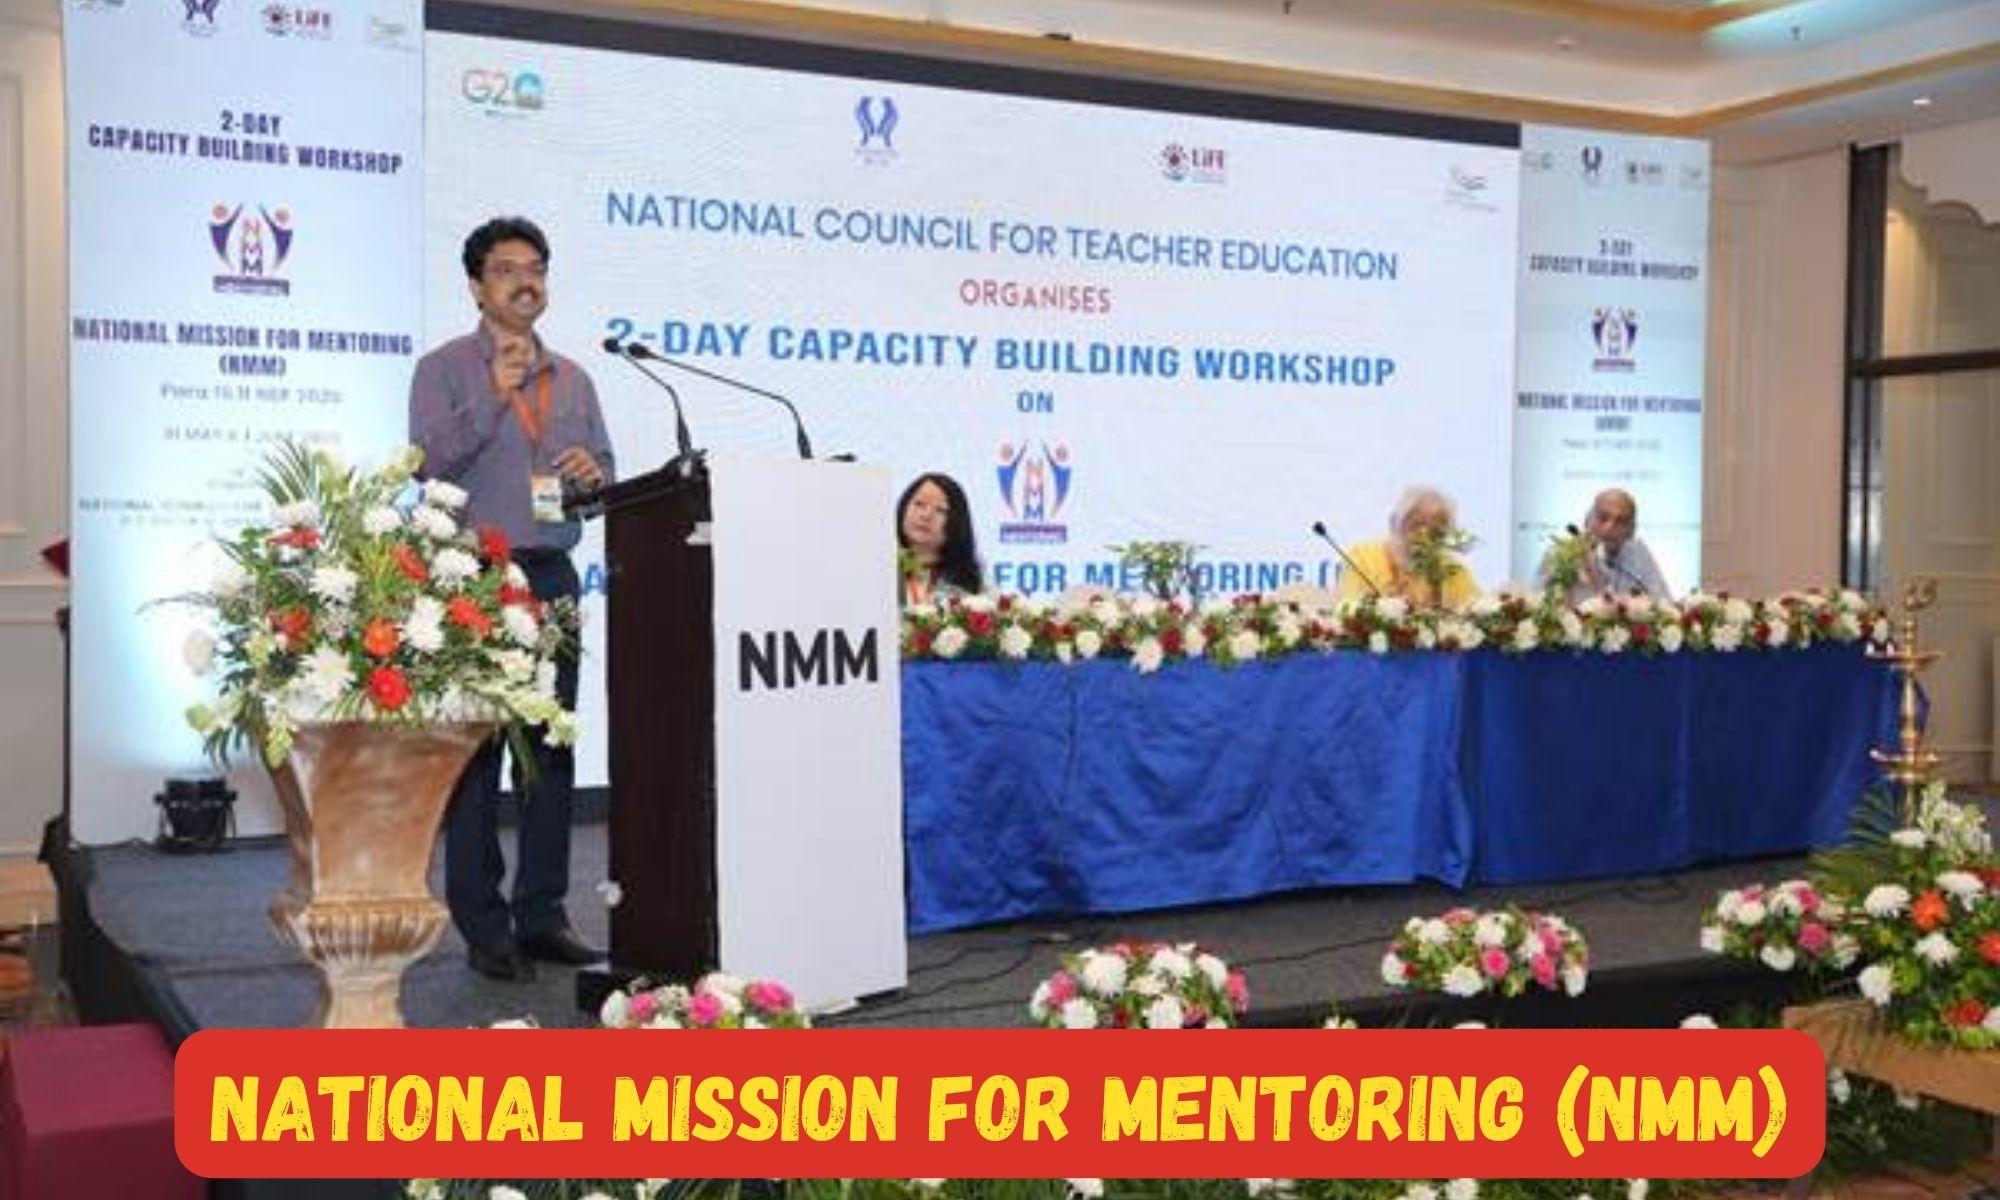 National Mission for Mentoring (NMM):